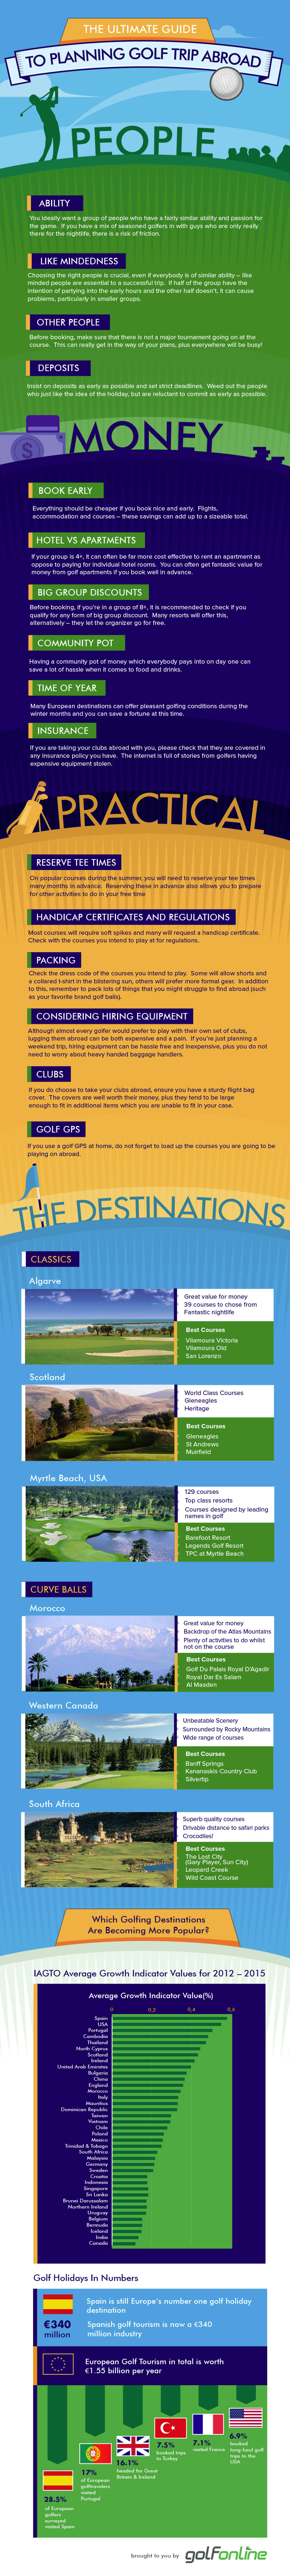 The Ultimate Guide To Planning A Golf Trip Abroad